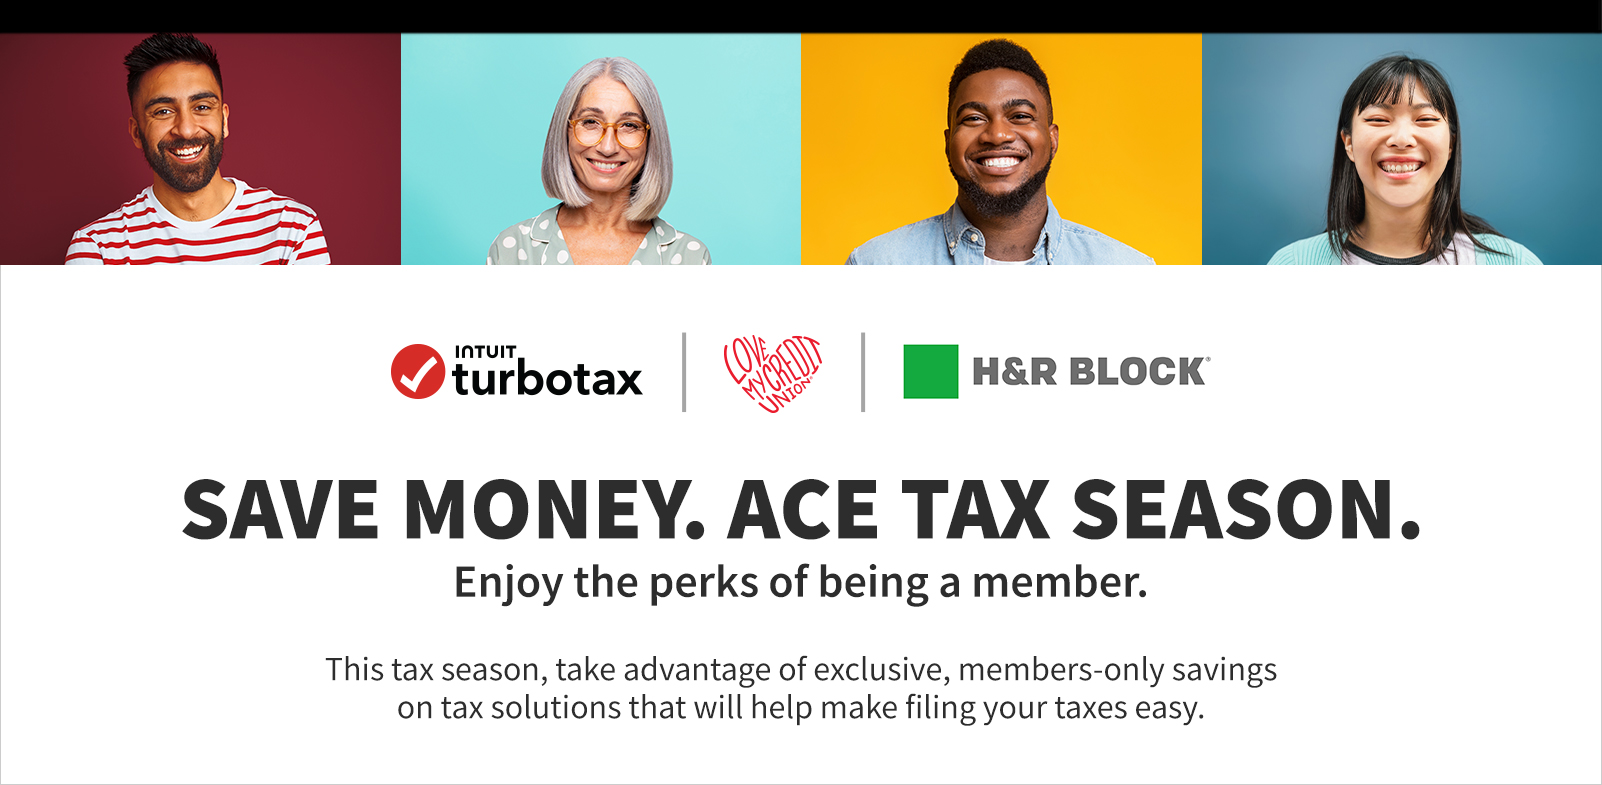 tax solutions for everyone